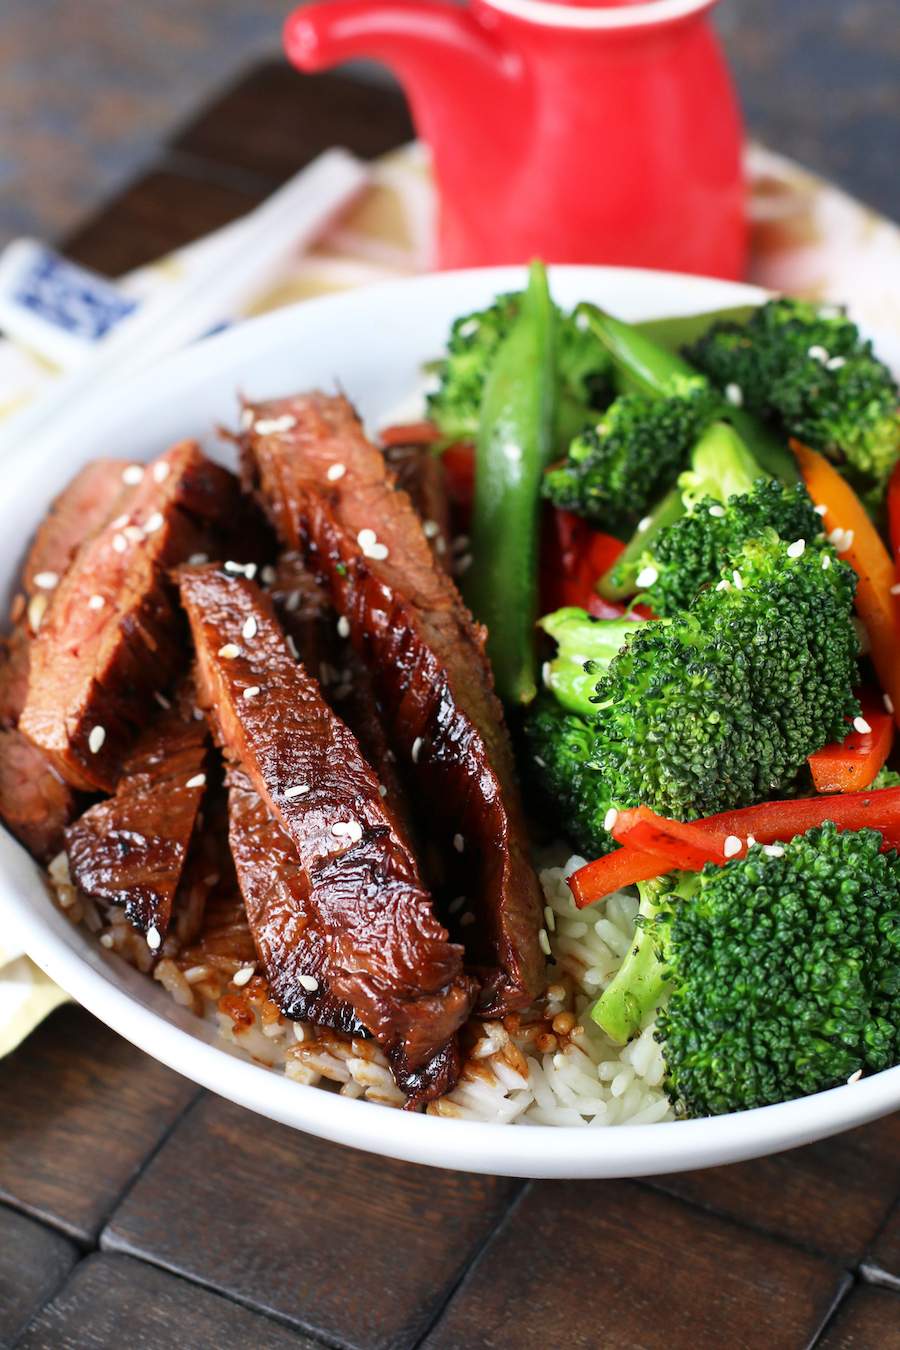 Image of Soy Marinated Steak Stir-Fry in a white bowl with broccoli and a red soy sauce container.